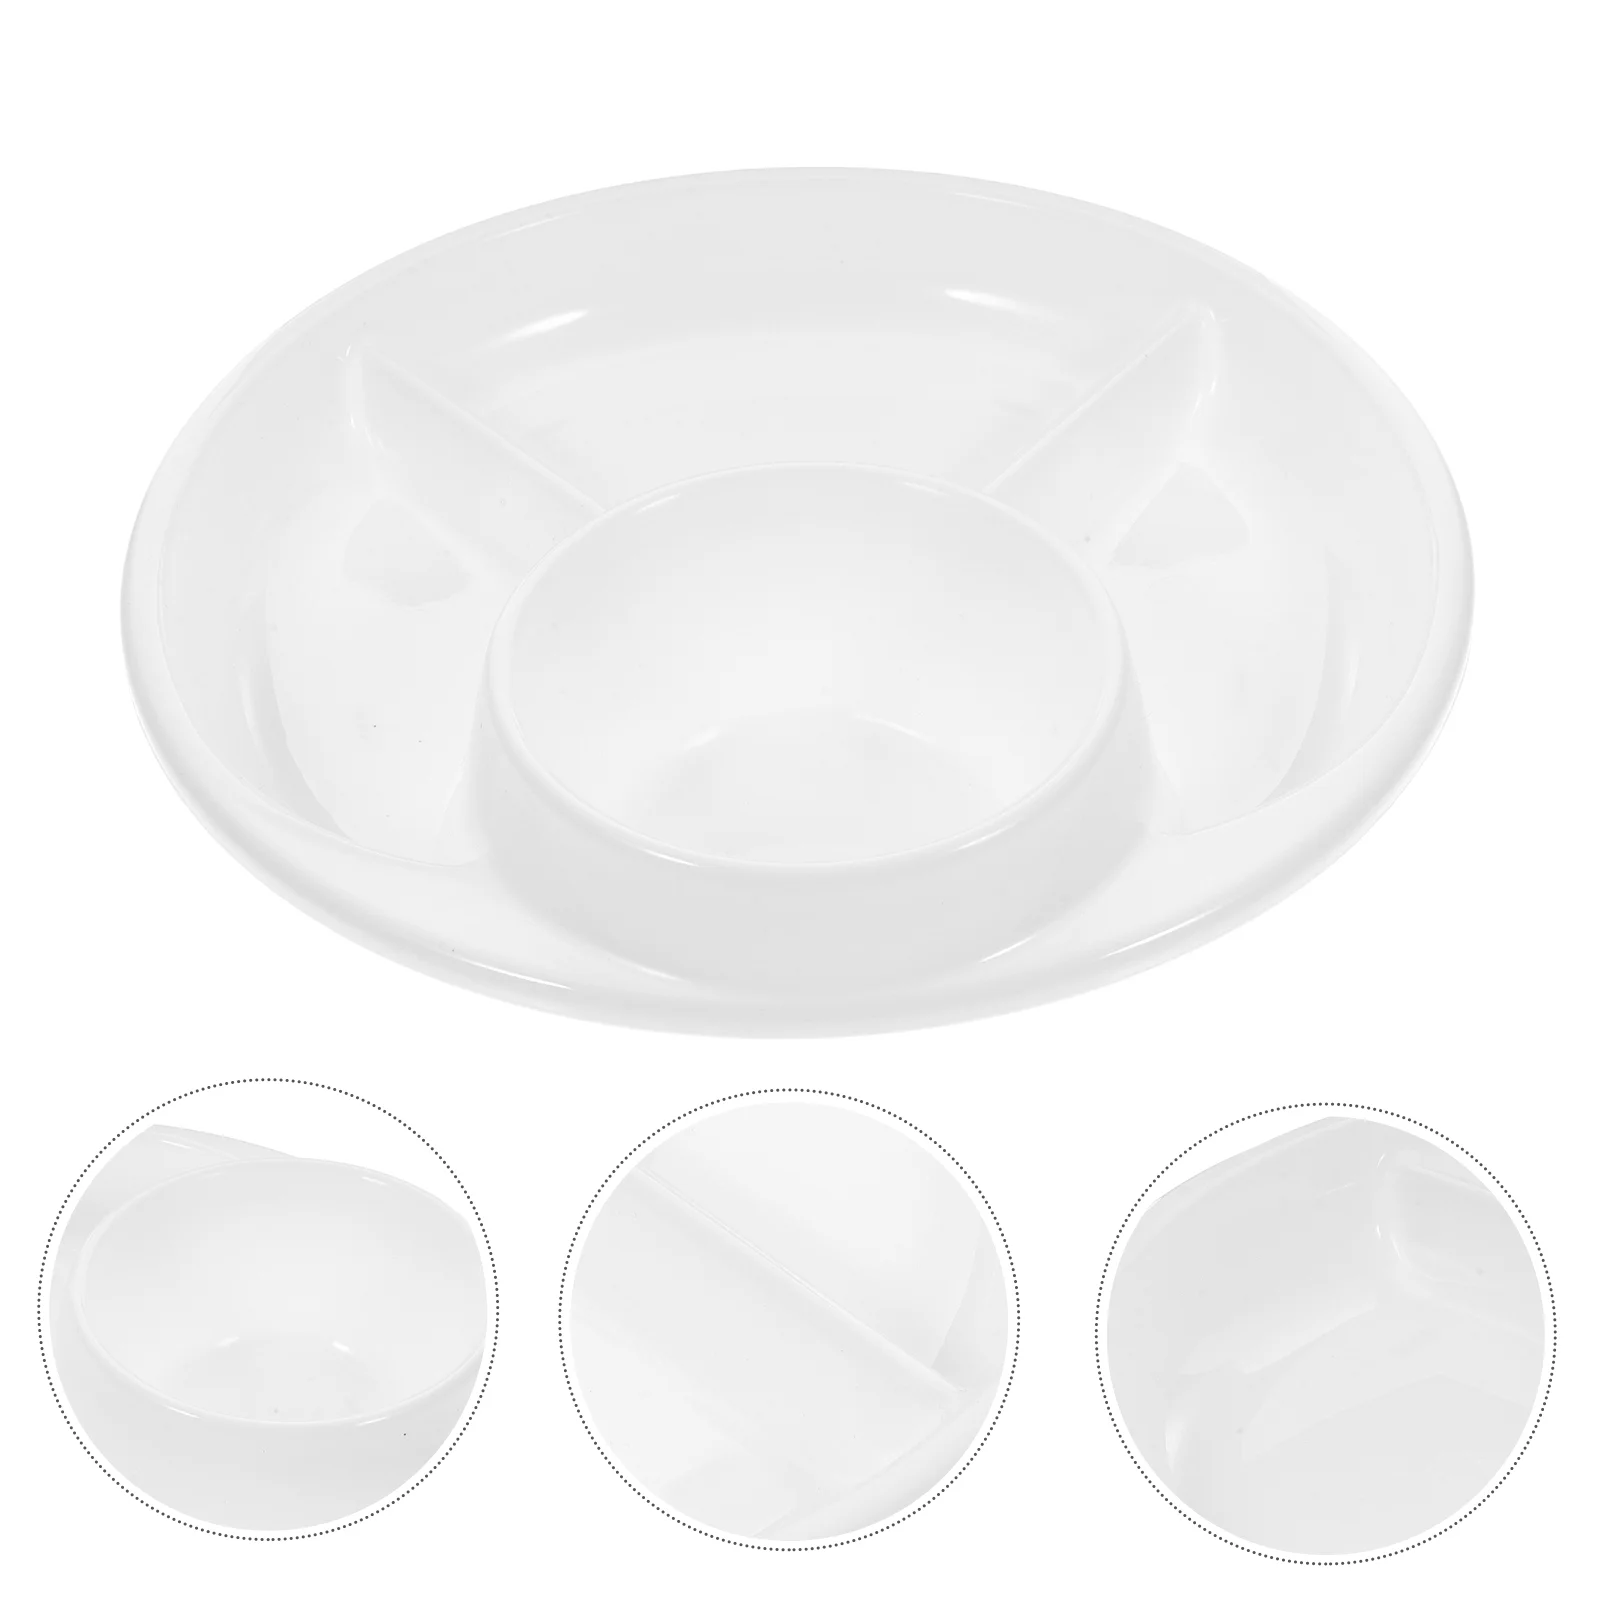 

Divided Plate Plates Serving Tray Dish Dinner Compartment Trays Breakfast Salad Dessert Portion Fruit Appetizer Platter Dishes